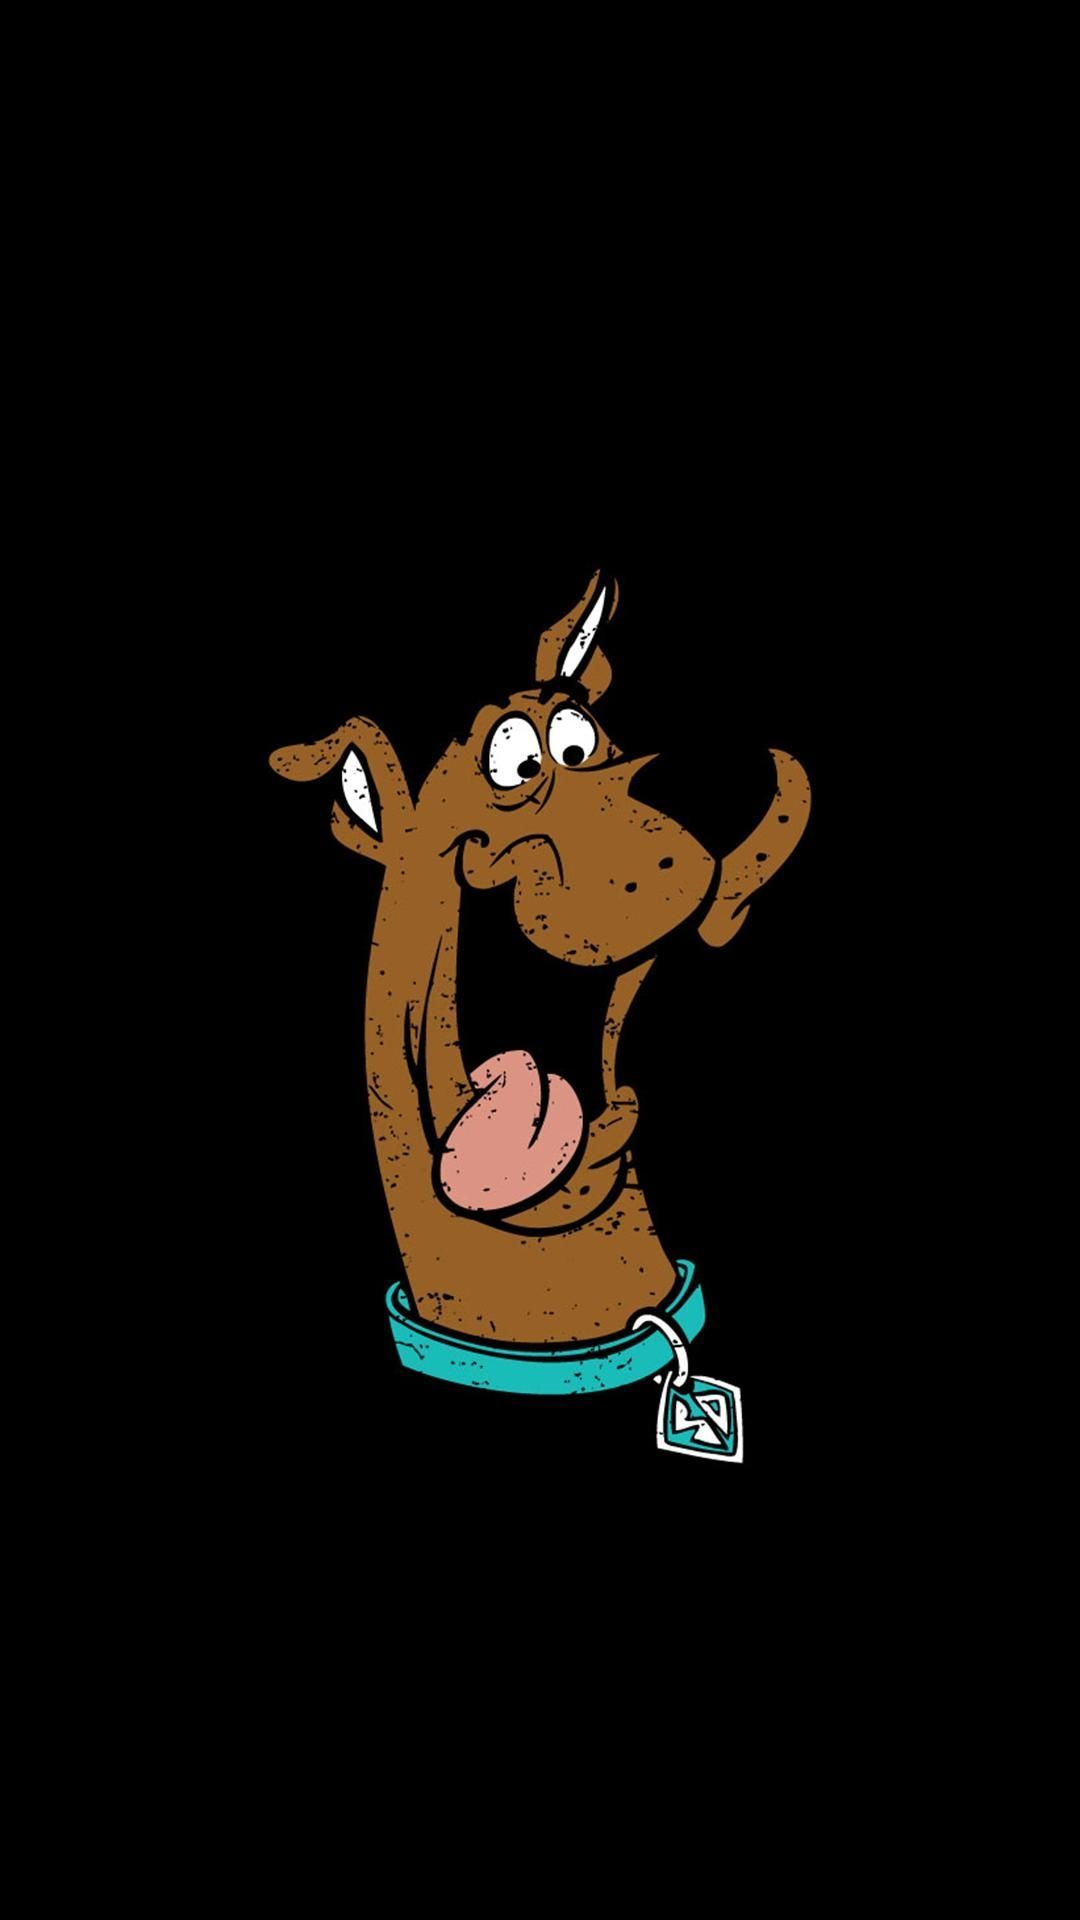 Scoo Doo HD Wallpaper For Android Apk Download within Amazing